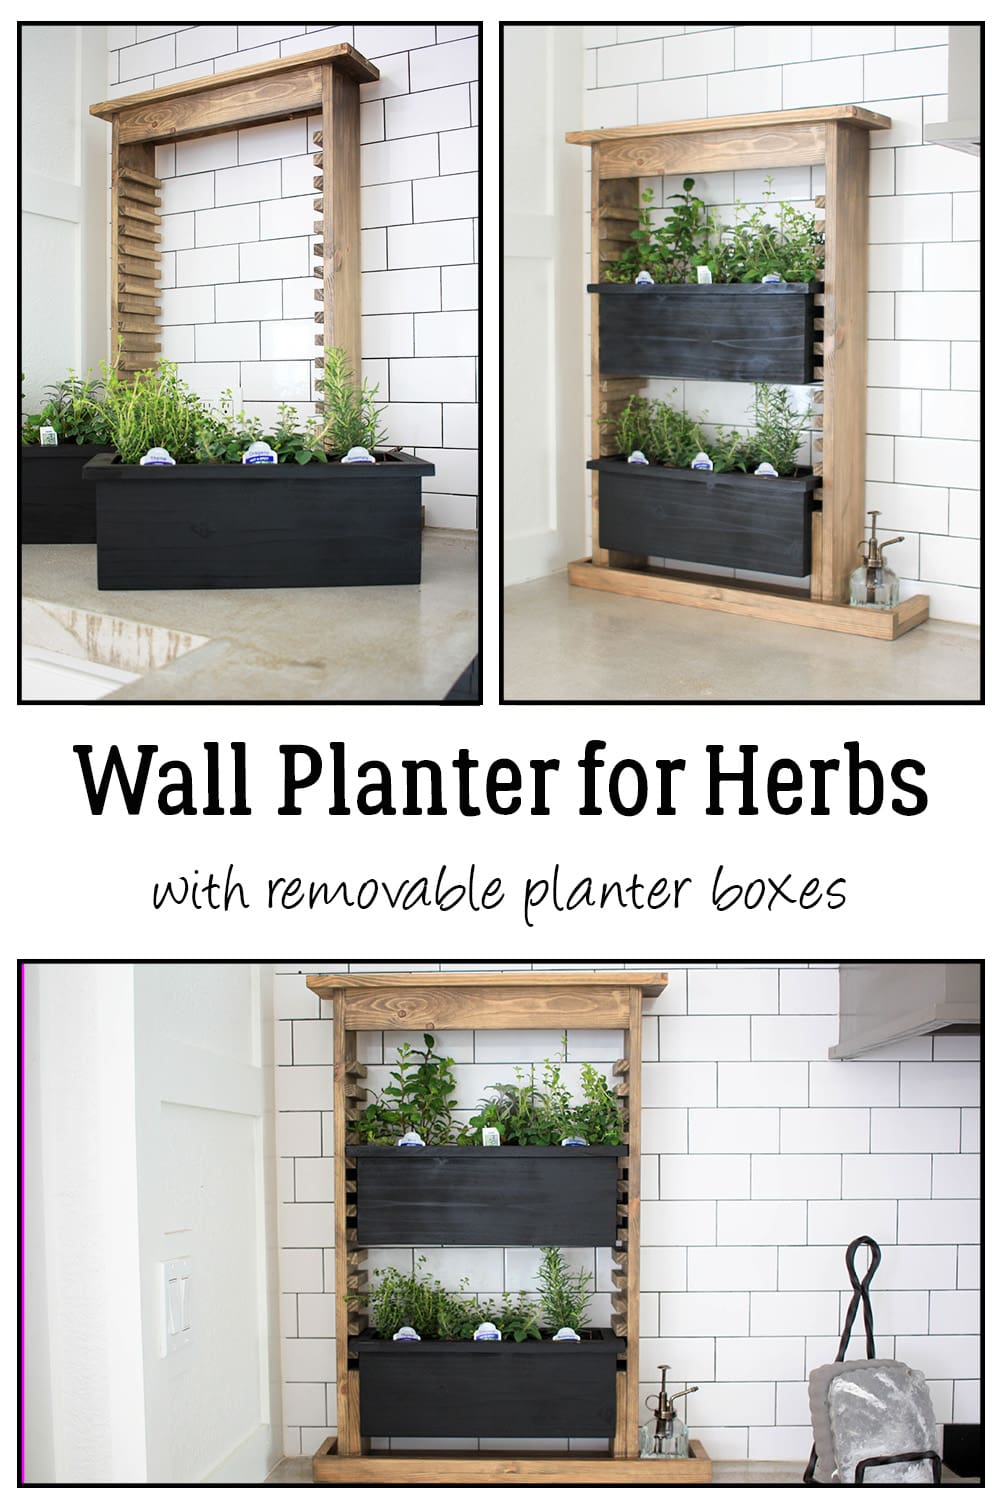 Wall Planter for Herbs